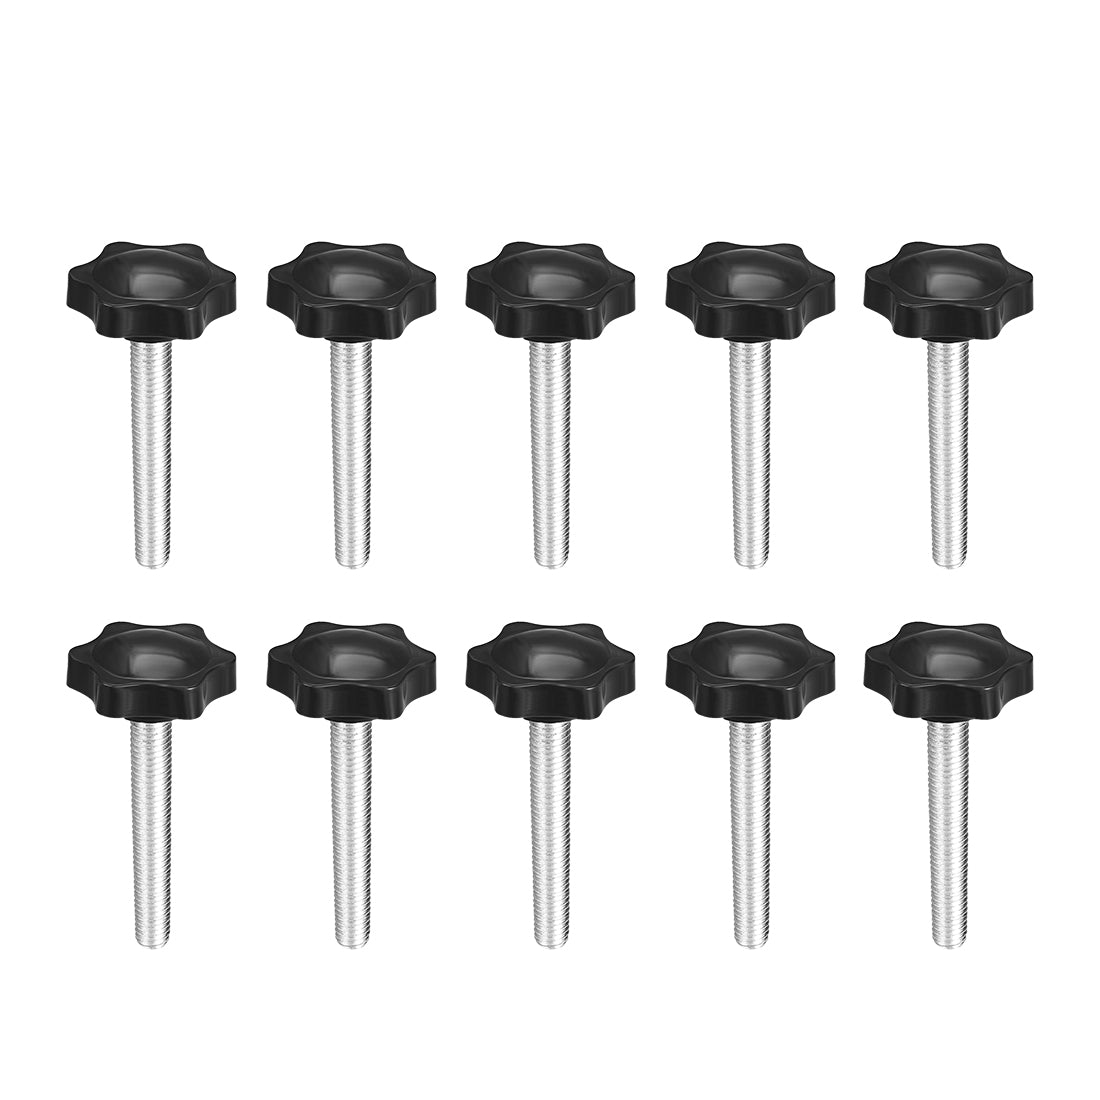 uxcell Uxcell Clamping Screw Knob Plum Hex Shaped Grips Star Knob Male Thread, 10Pcs